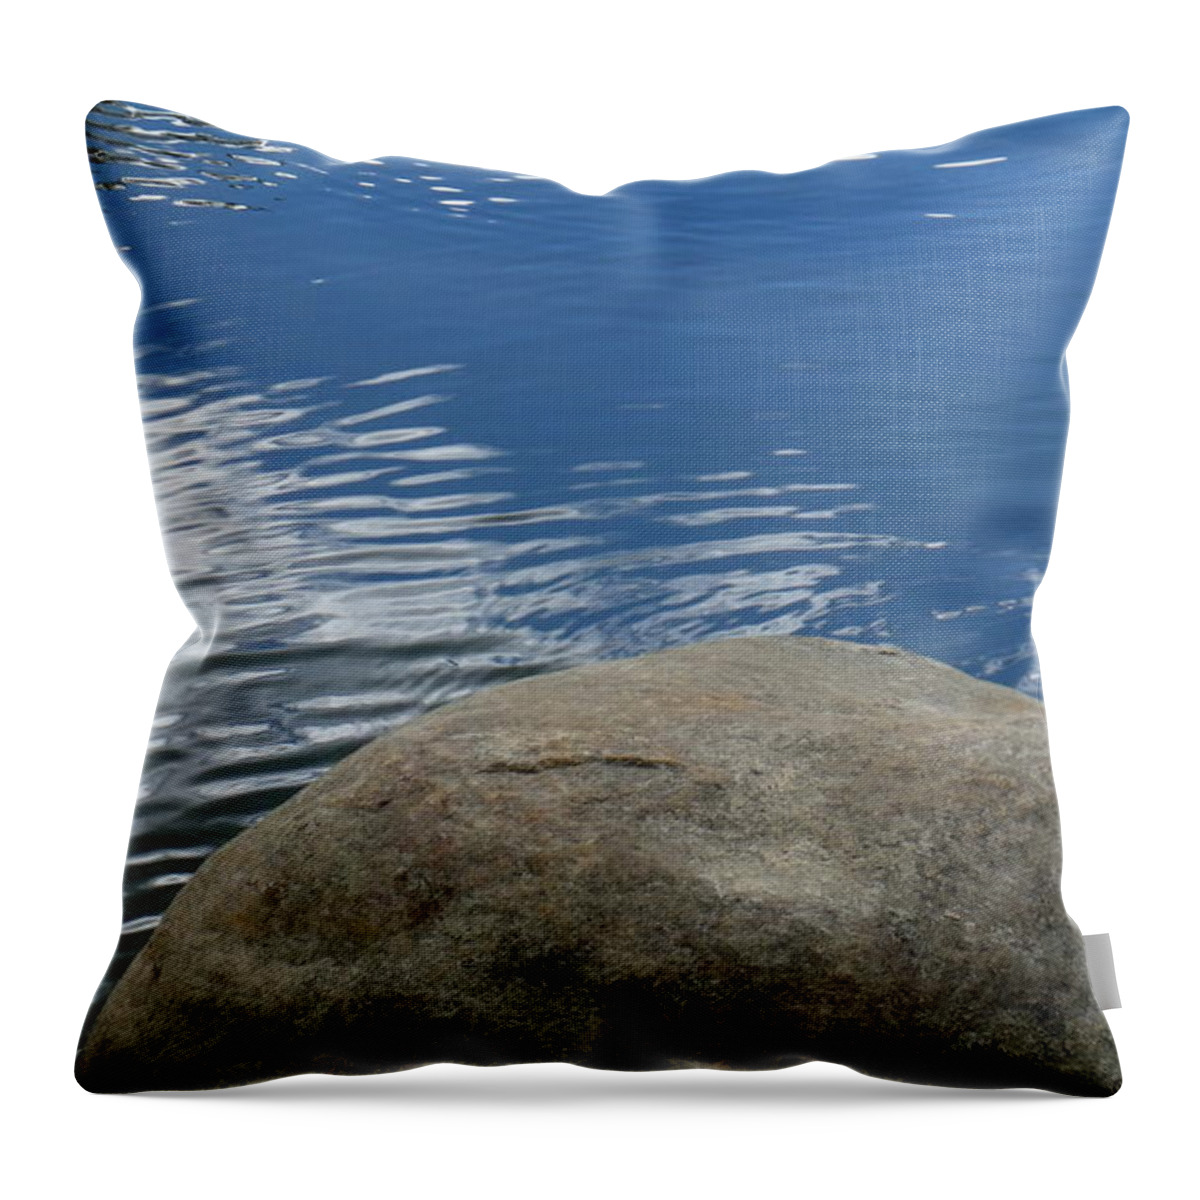 Anchored Throw Pillow featuring the photograph Anchored #1 by Edward Smith